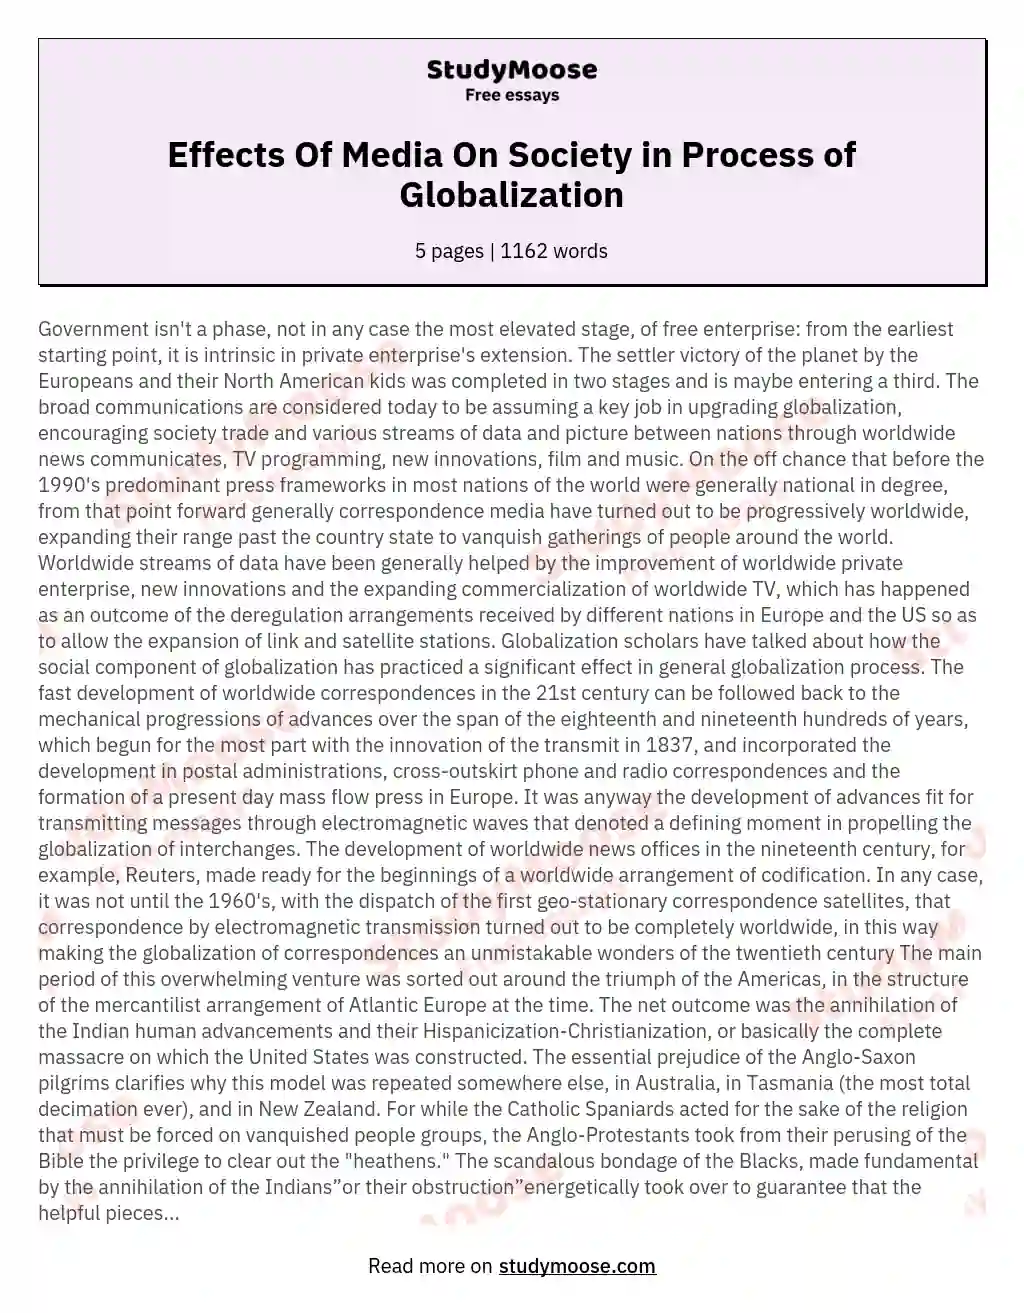 Effects Of Media On Society in Process of Globalization essay